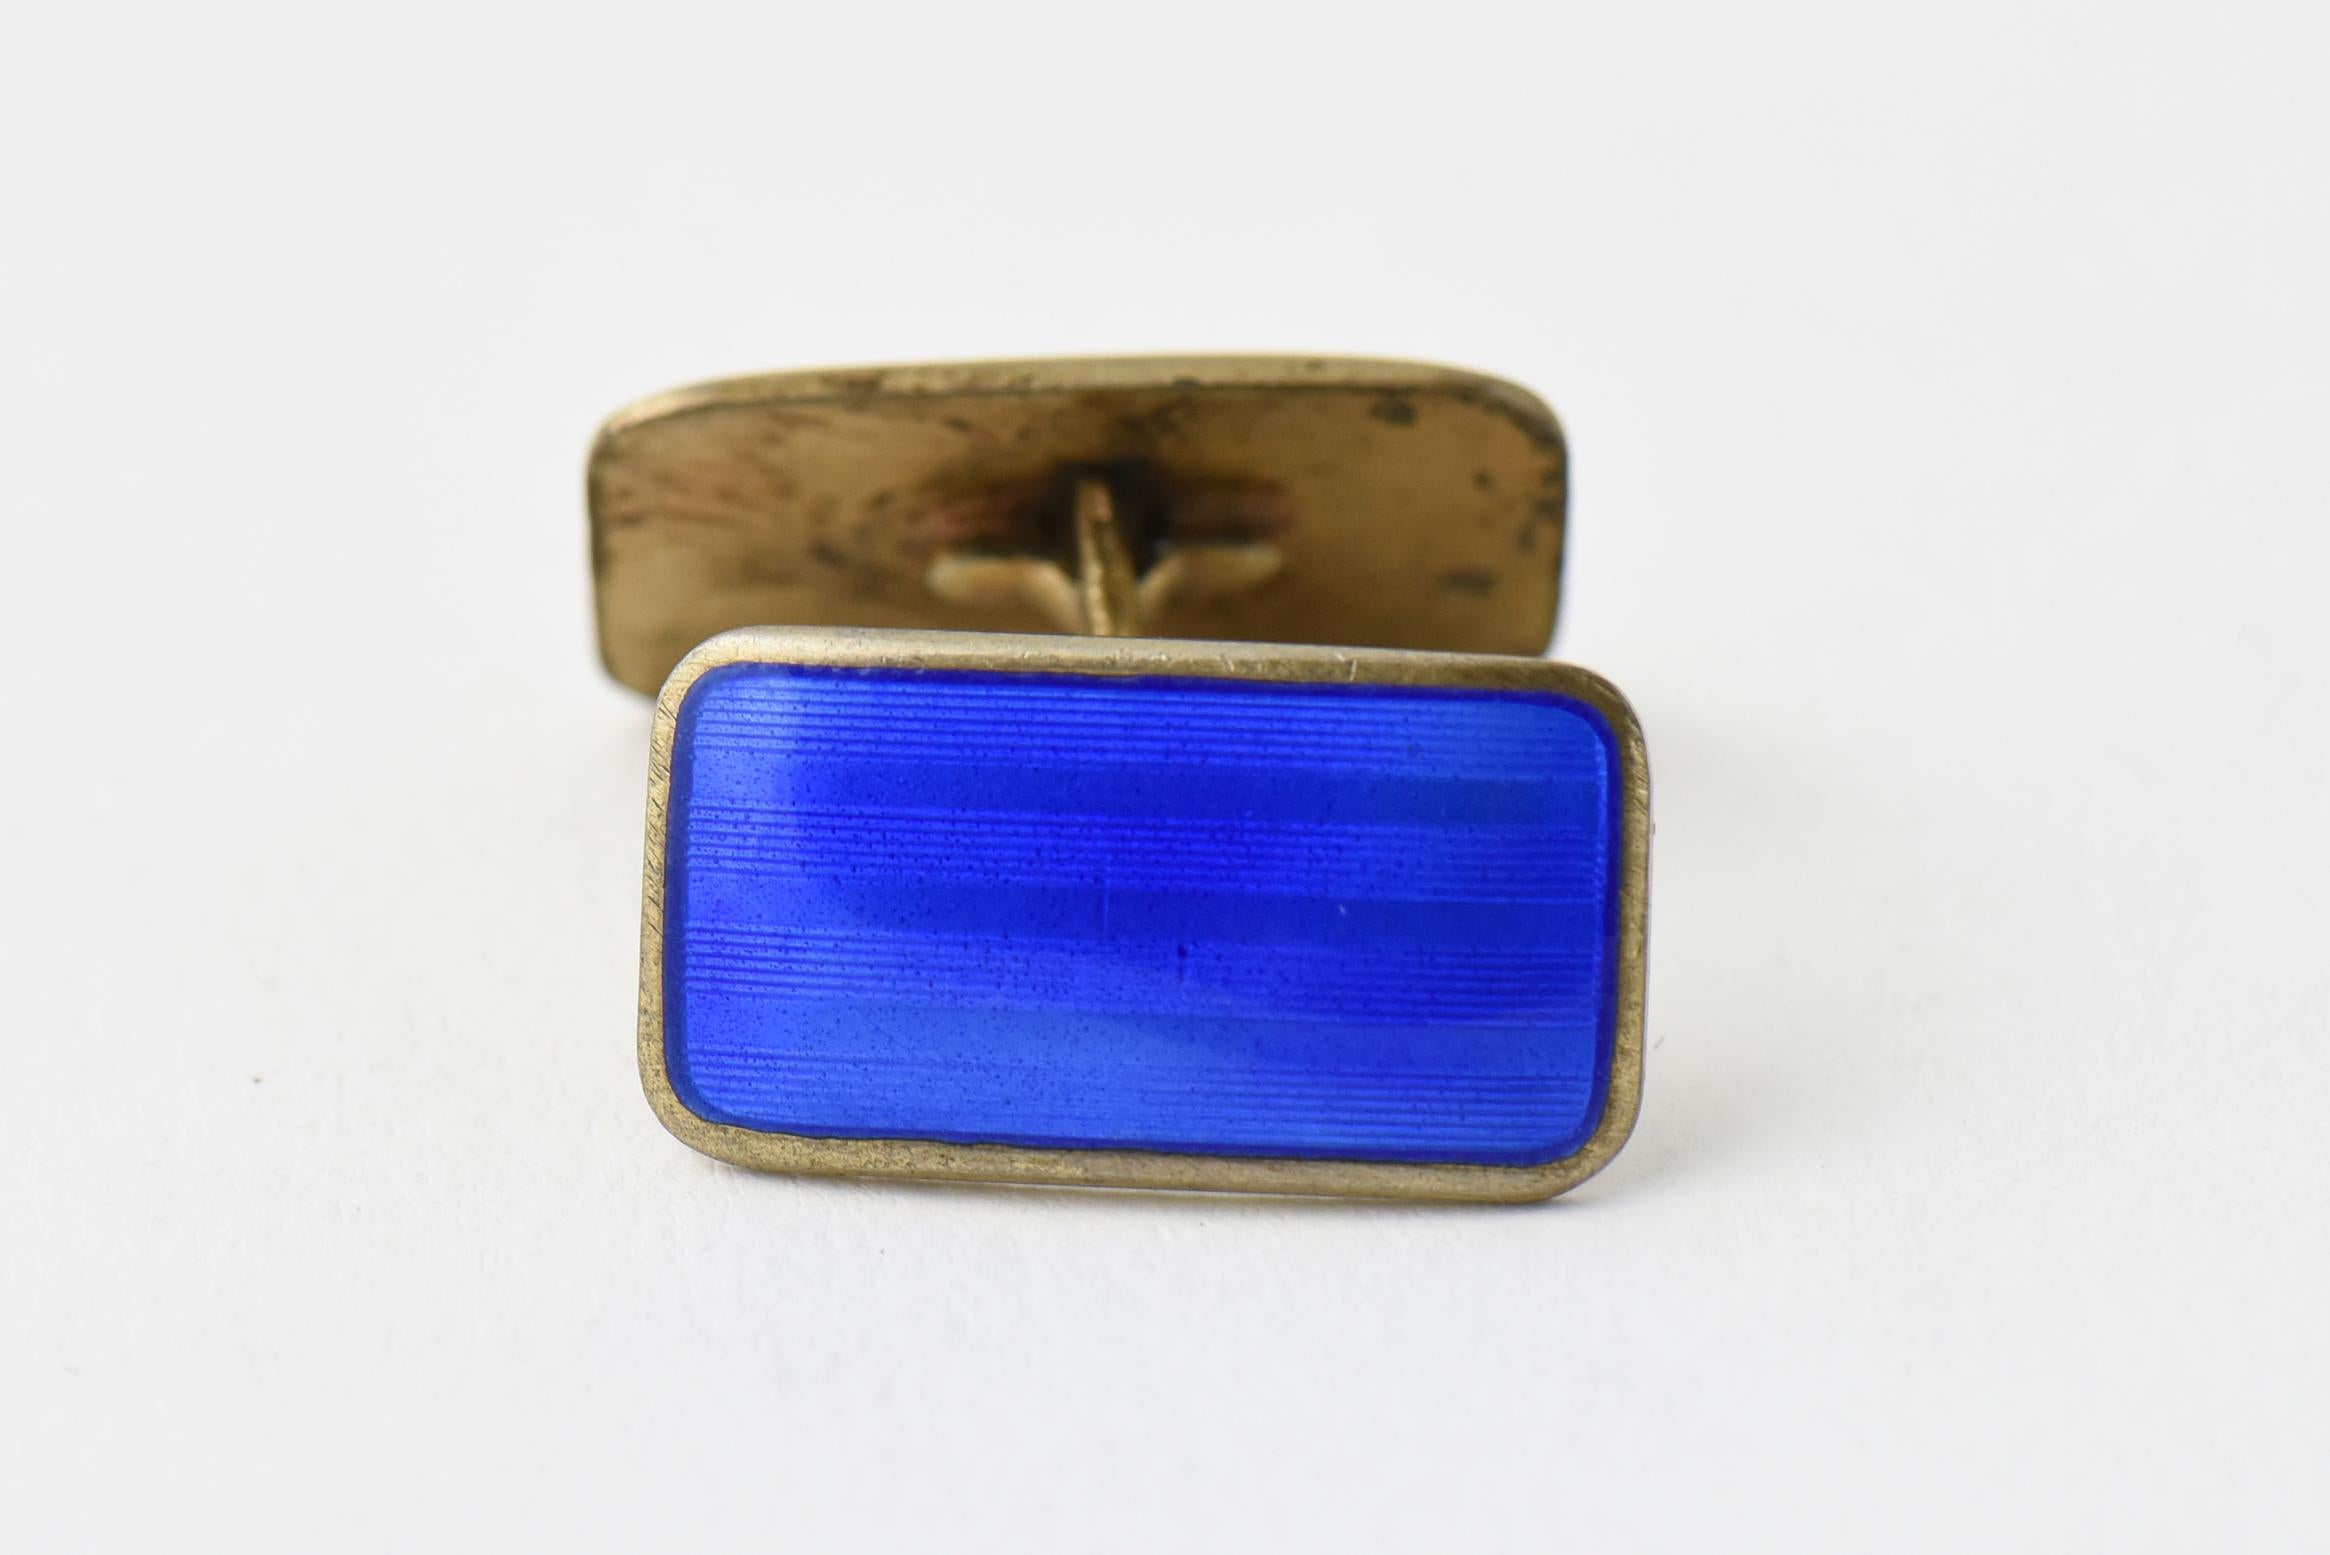 Mid 20th century blue enamel and gilded sterling silver cuff links. Marked: Norne (Aksel Holmsen) Norway 925.